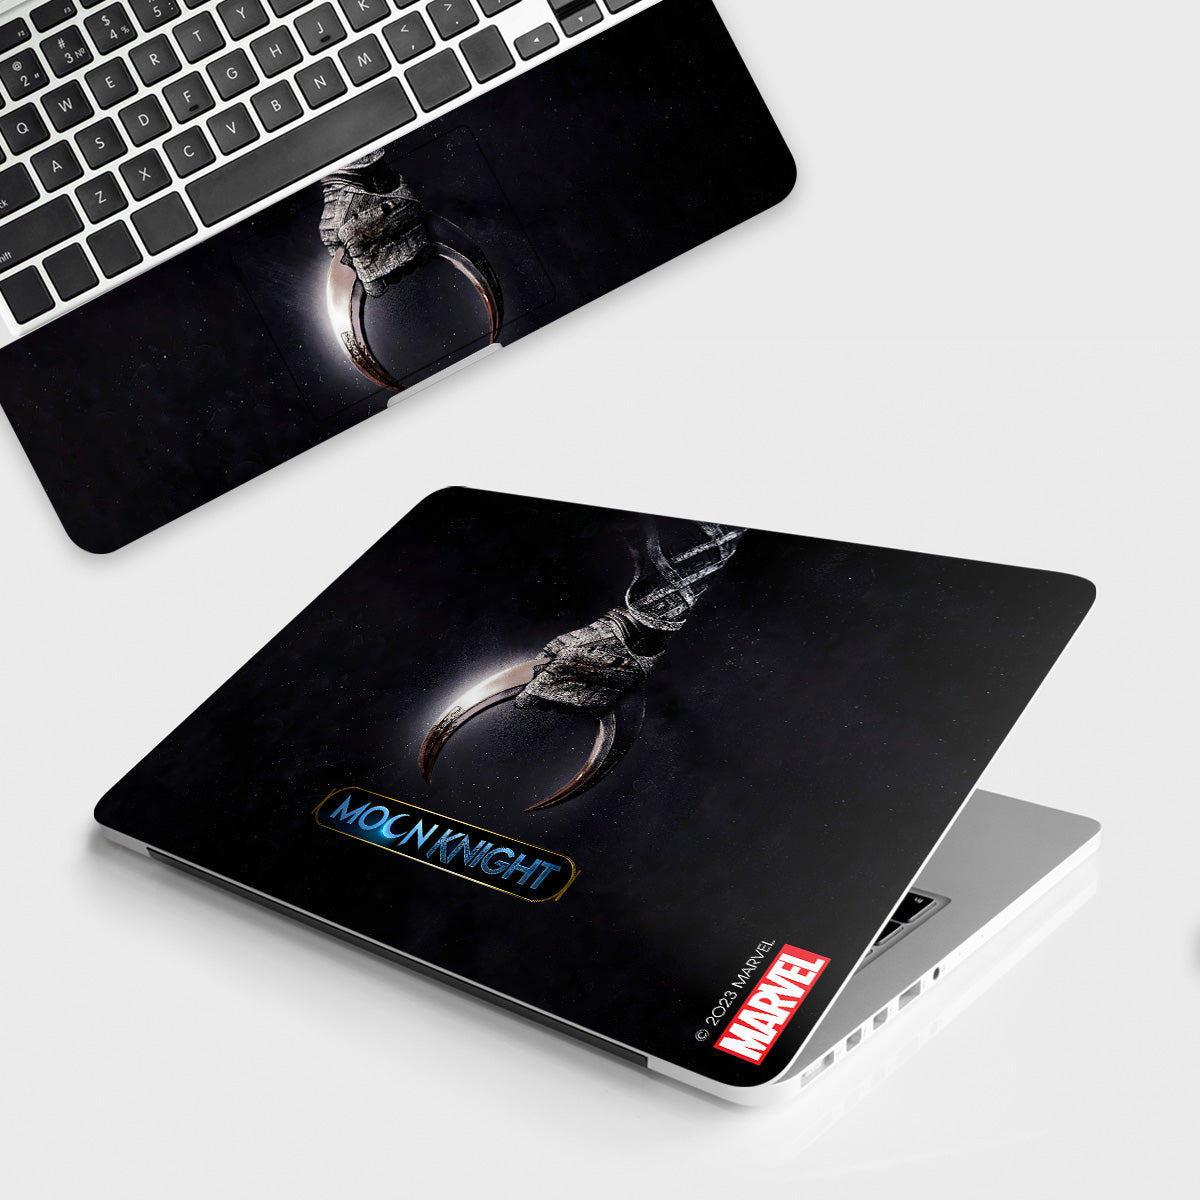 Brothers Innovation Laptop Skins Comics Crescent Blades of Moon Knight